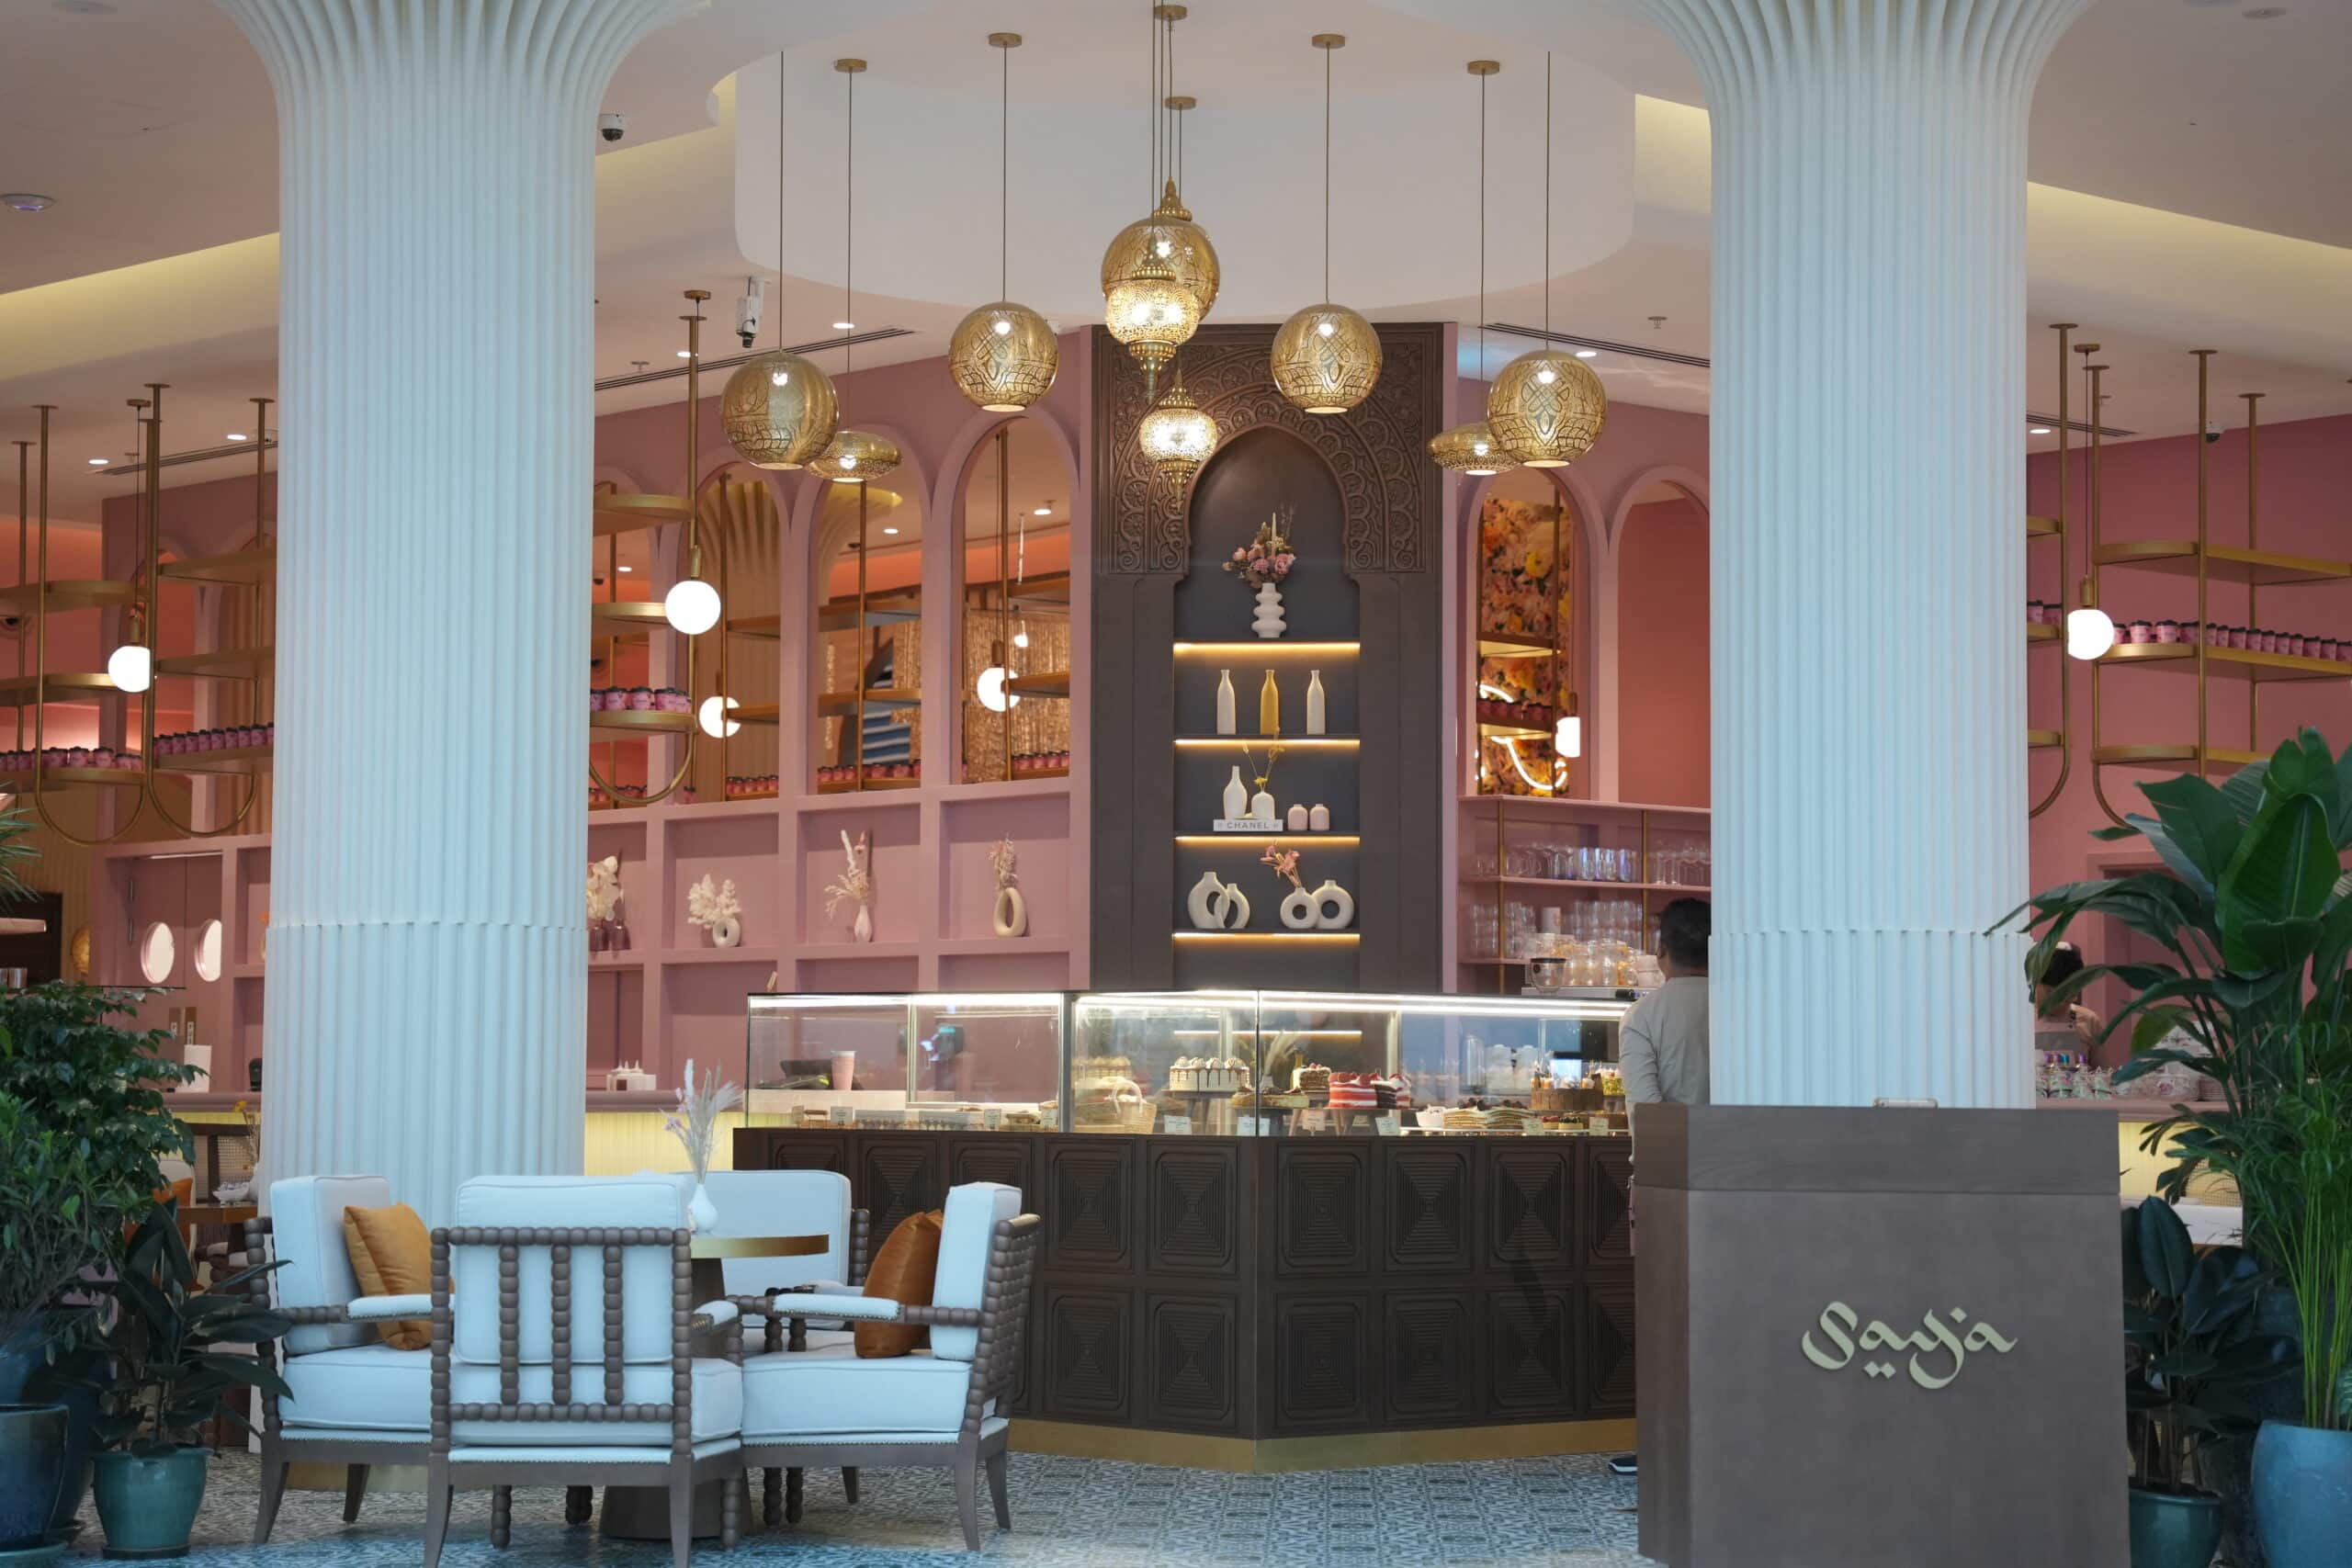 THE MOST FAMOUS AND INSTAGRAMABLE BRASSERIE IN DUBAI OPEN ITS DOORS